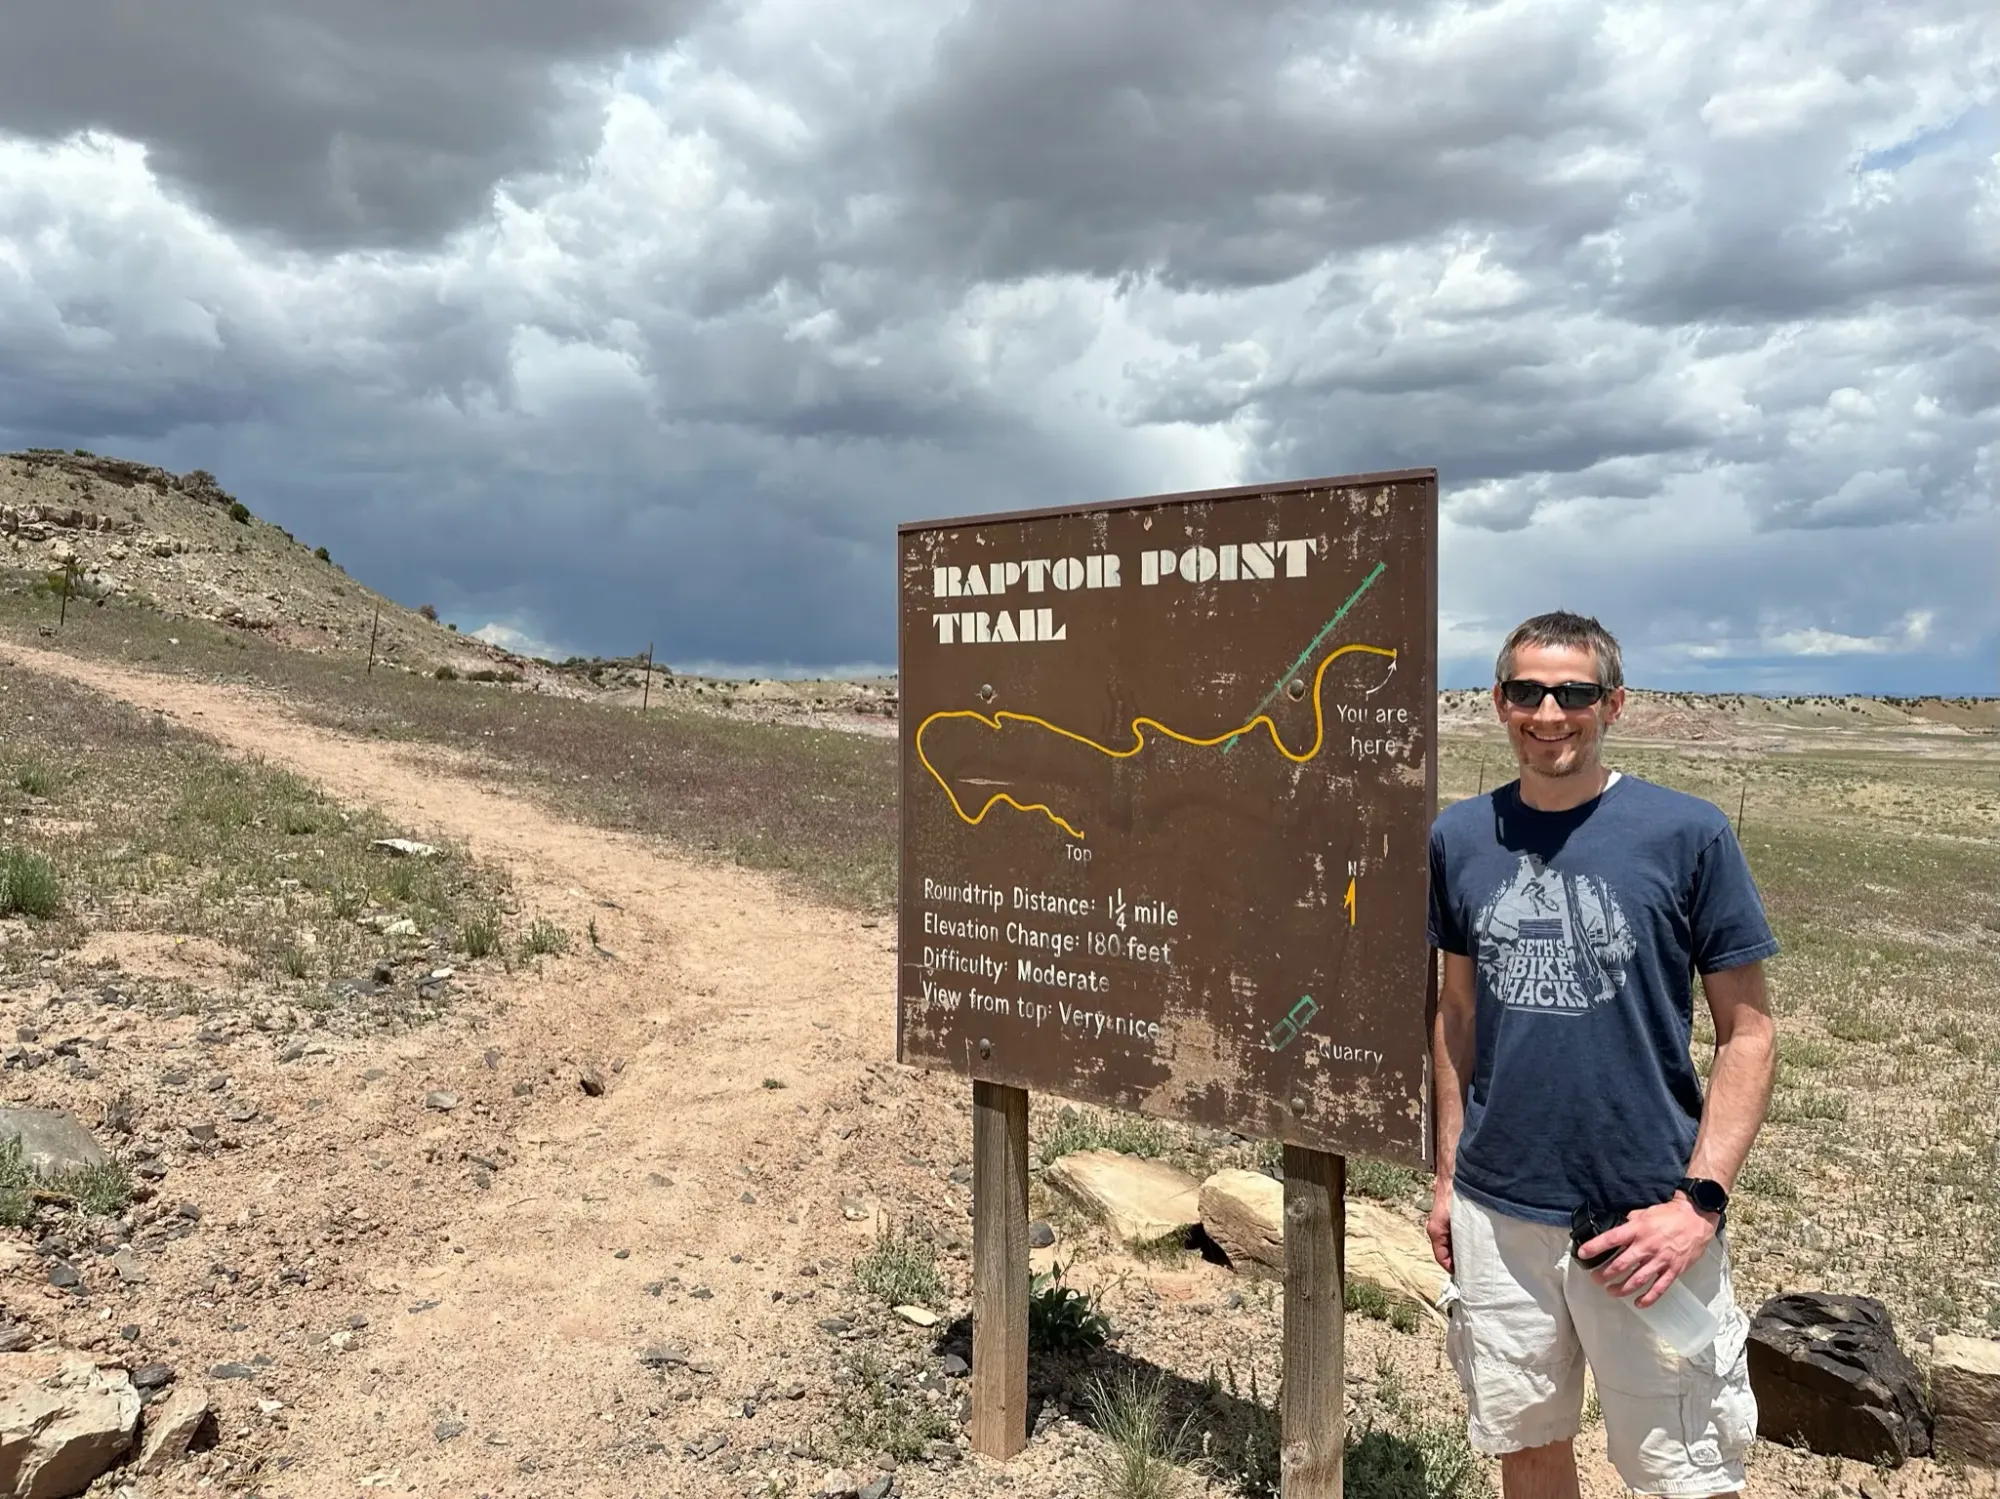 Keith is standing next to the trail sign for the Raptor Point Trail